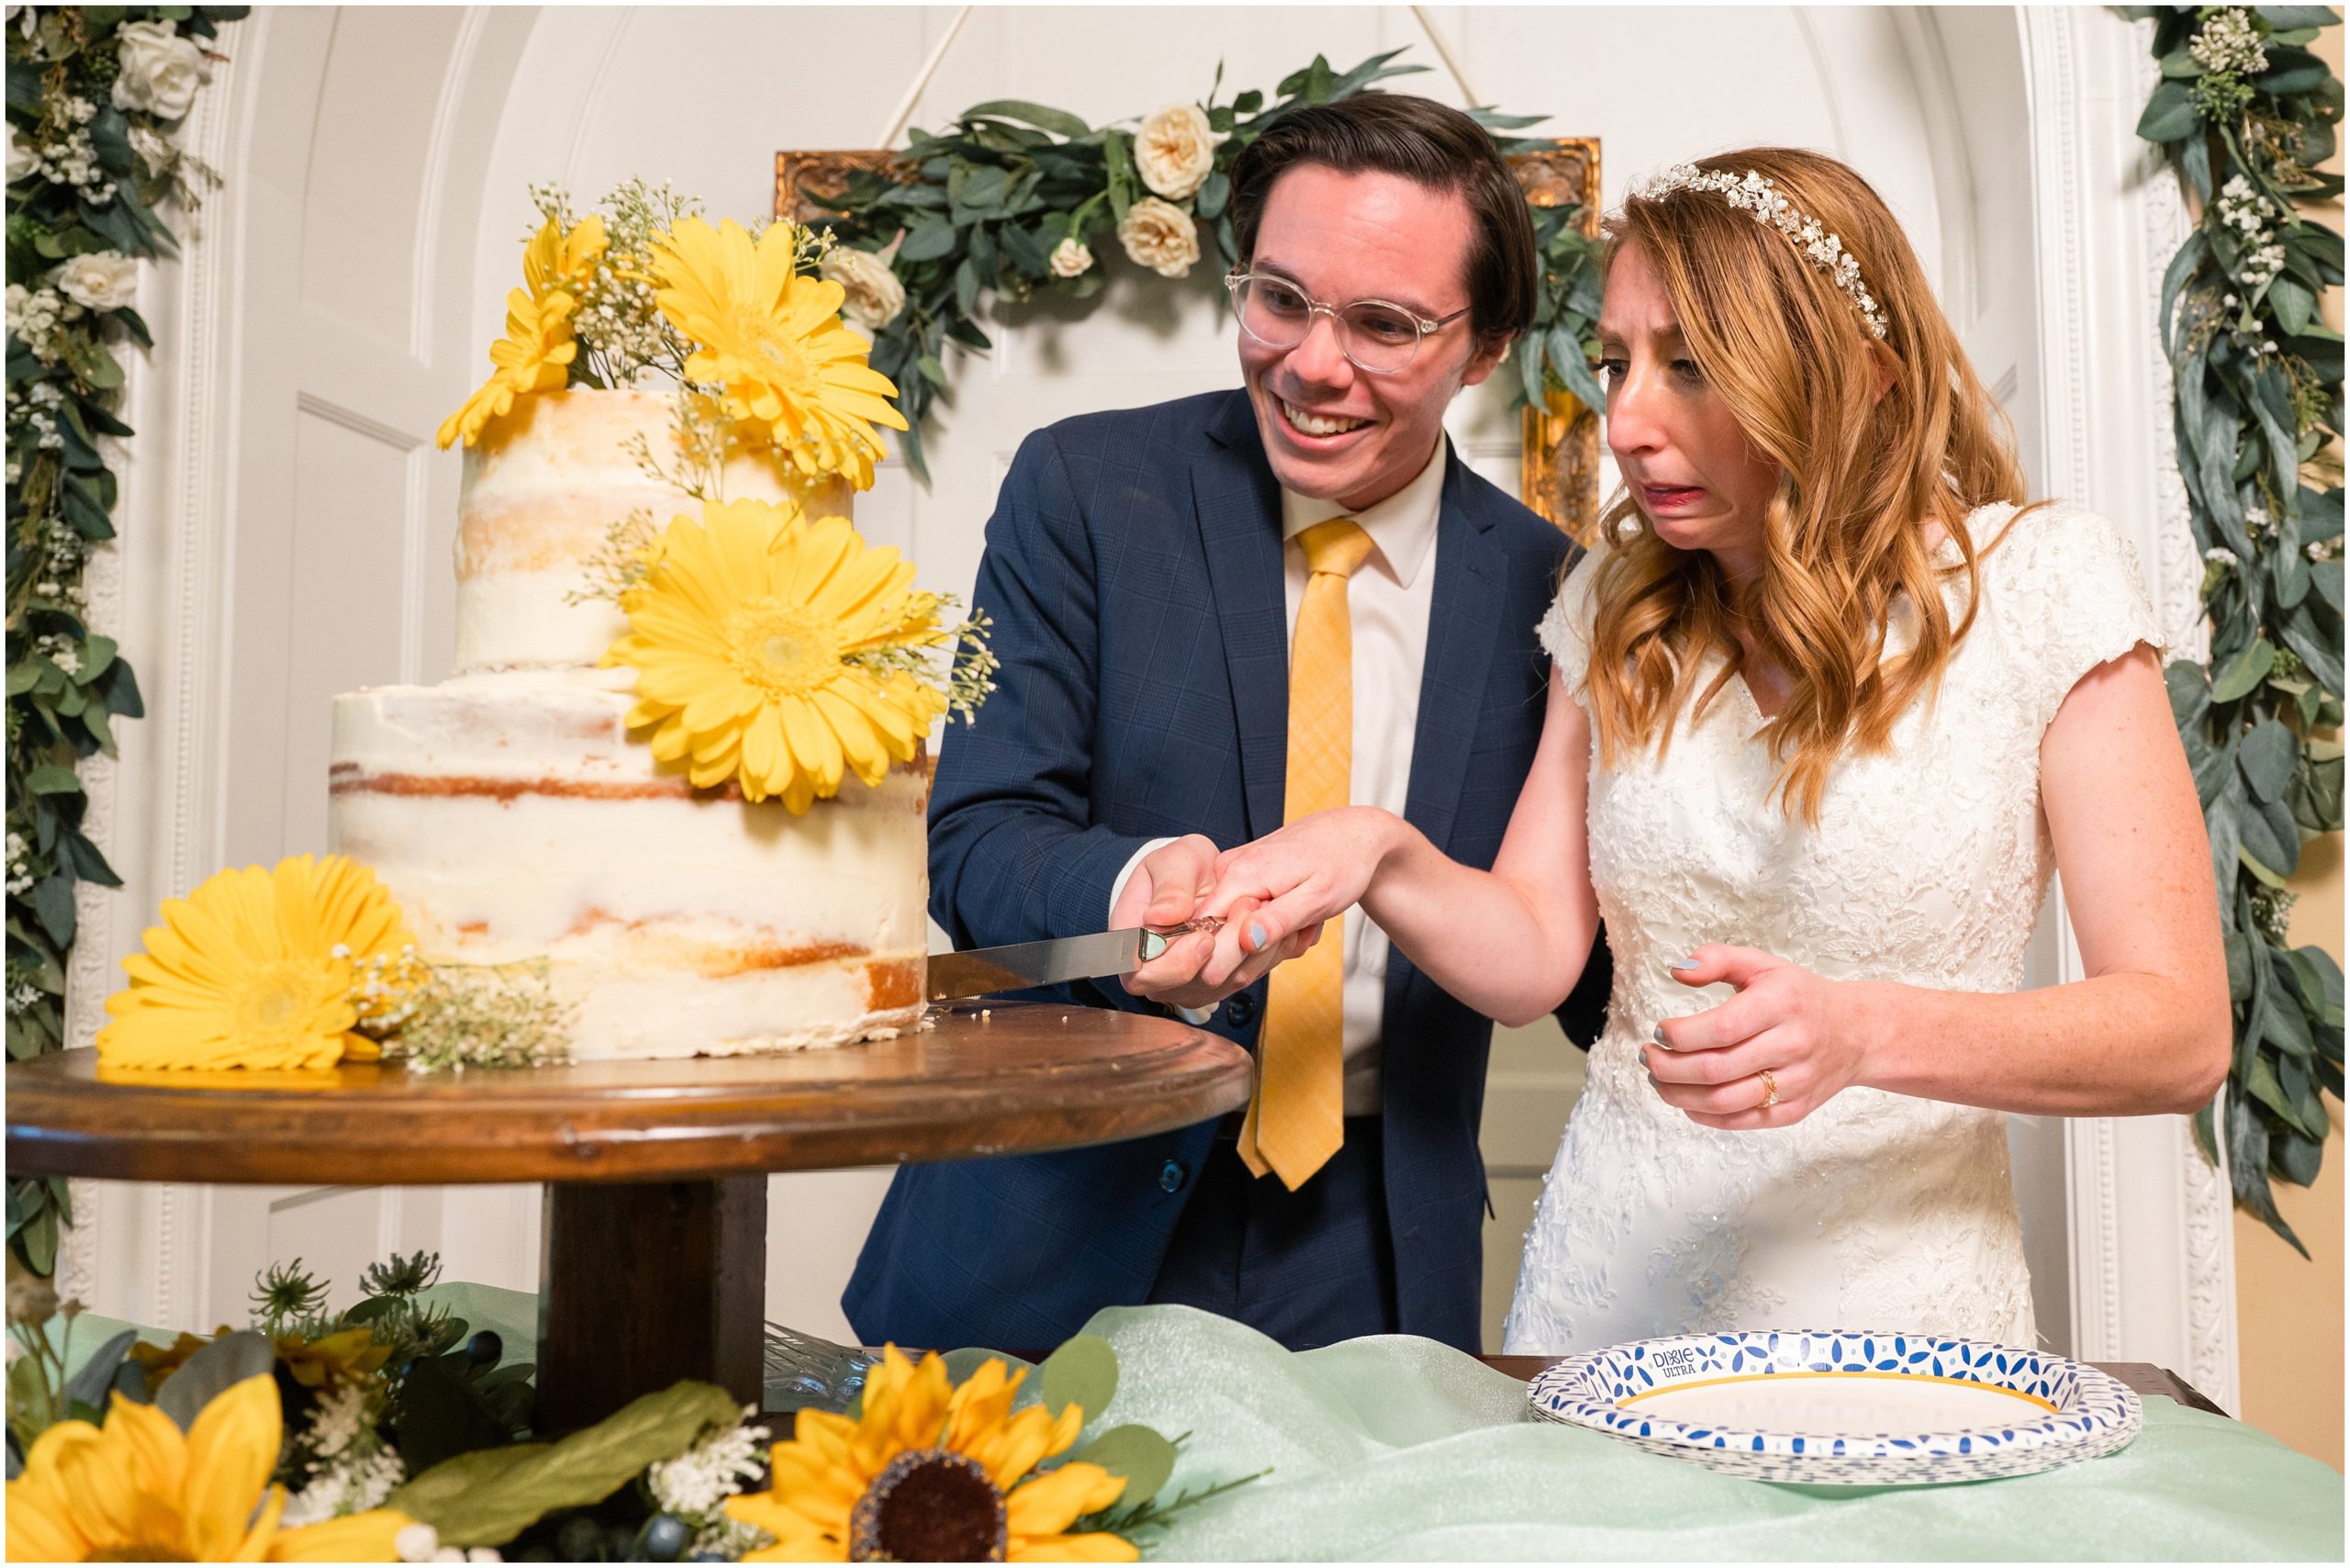 Cake cutting at reception | Payson Temple and White Willow Wedding | Jessie and Dallin Photography